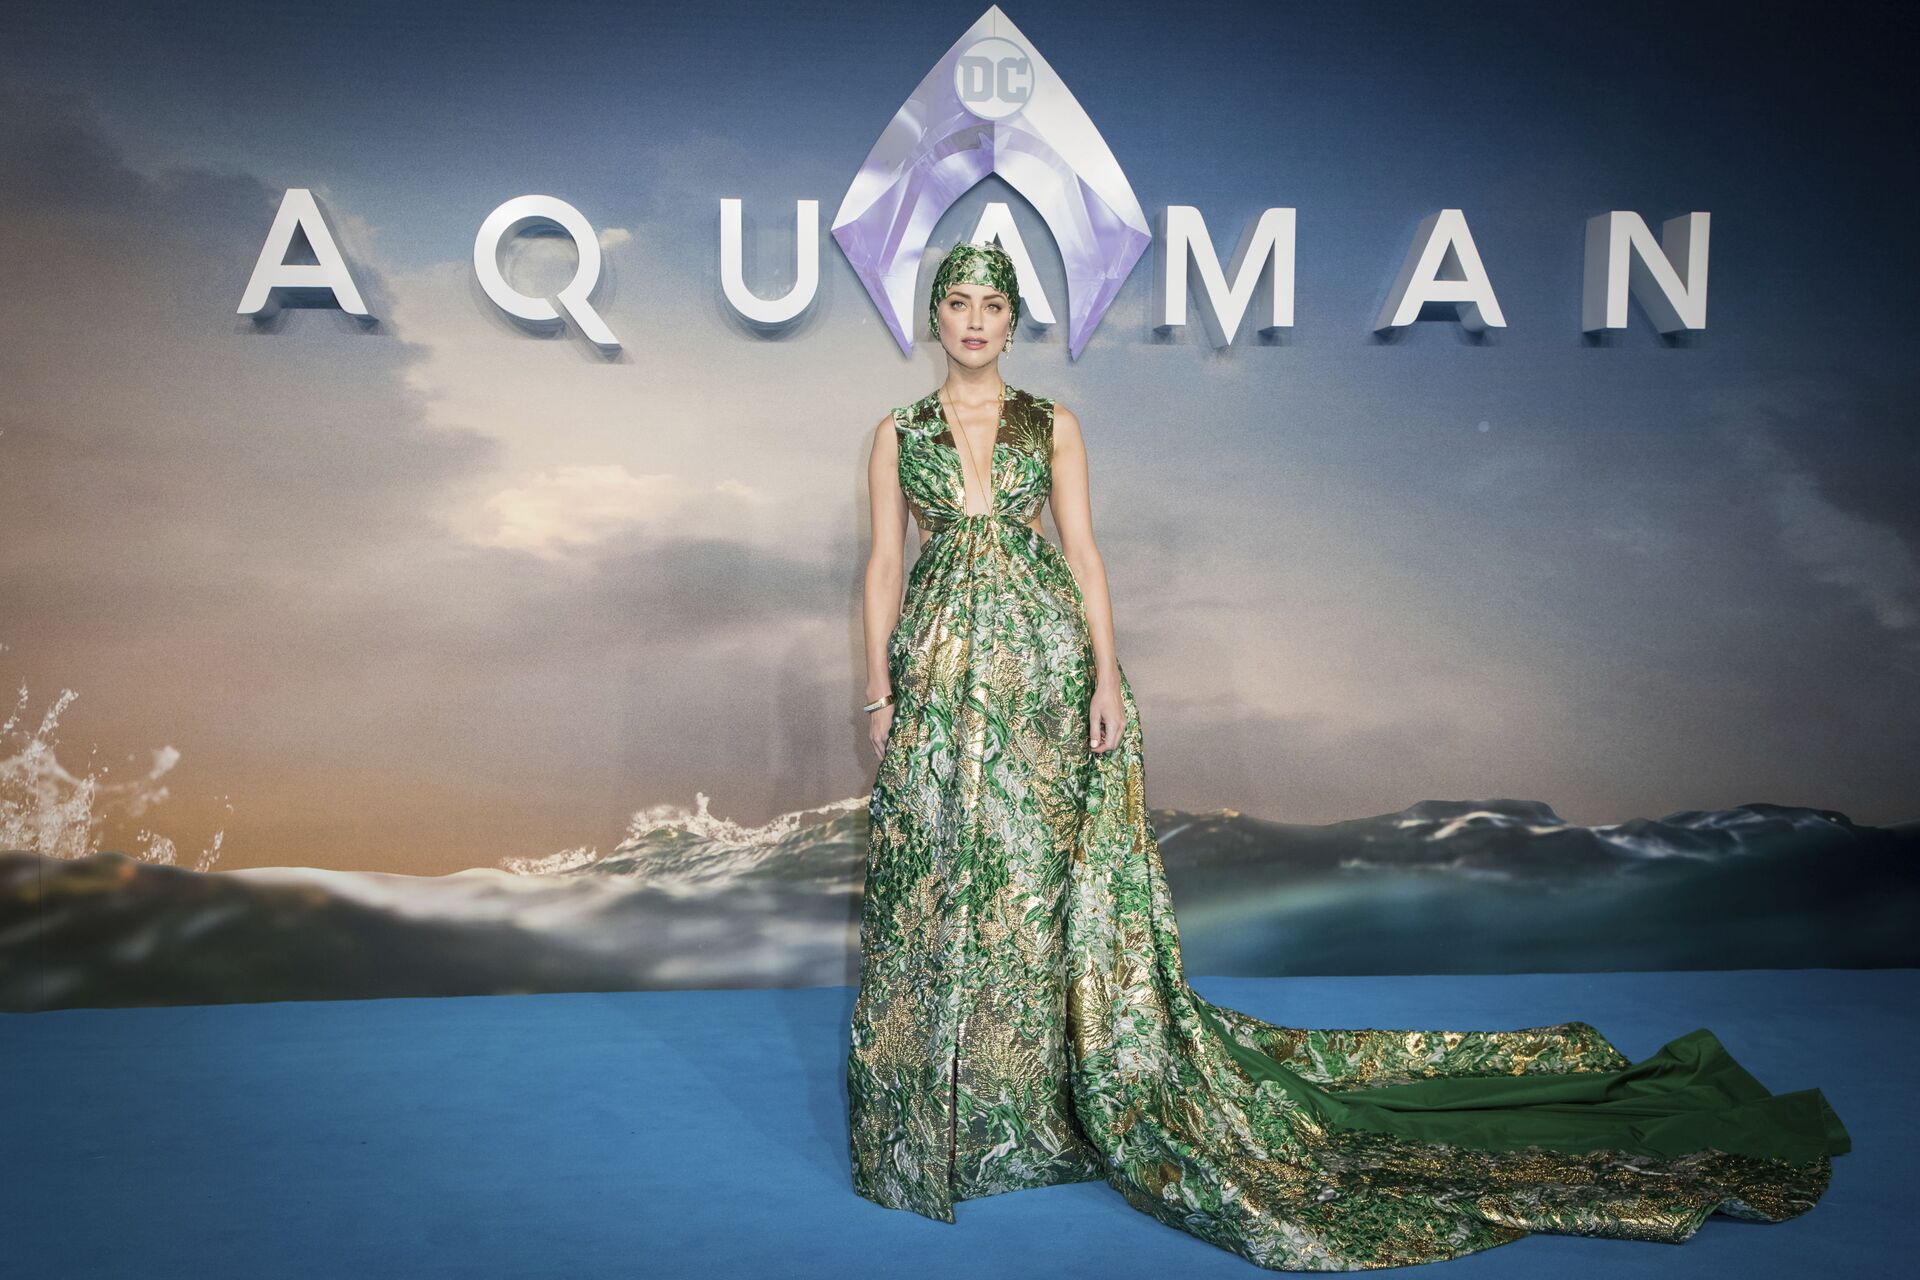 Actress Amber Heard poses for photographers upon arrival at the world premiere of the film 'Aquaman', in London, Monday, Nov. 26, 2018 - Sputnik International, 1920, 04.05.2022